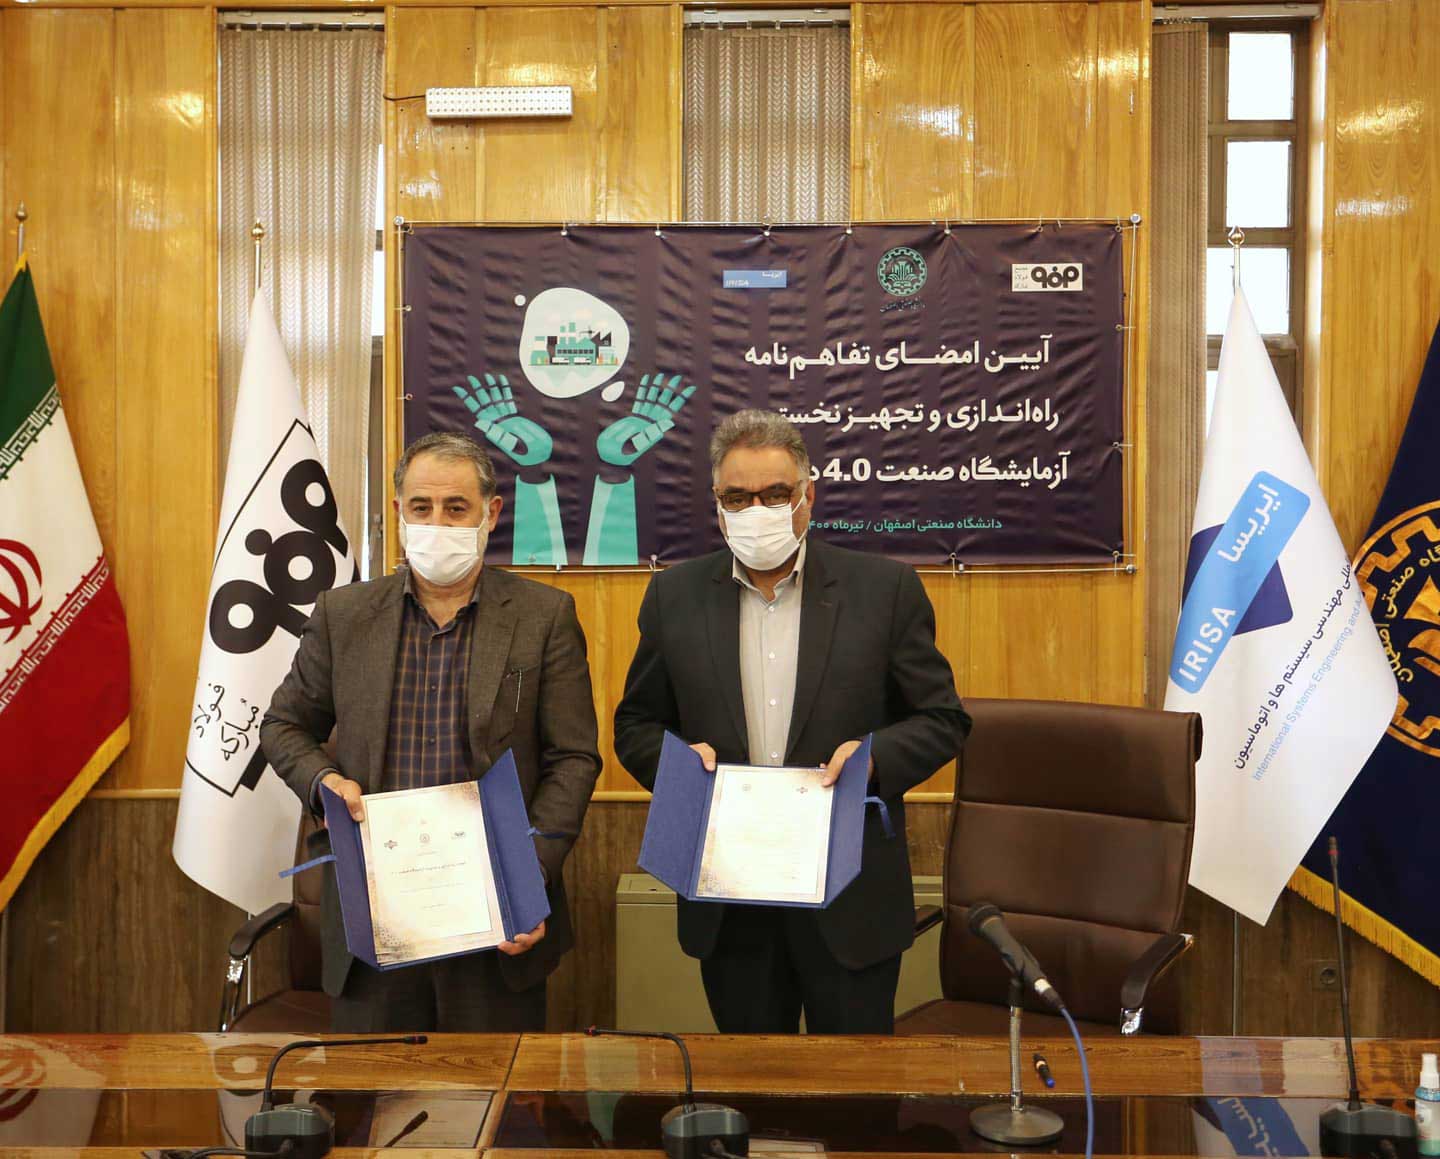 Signing of a memorandum of cooperation between IRISA and Isfahan University of Technology